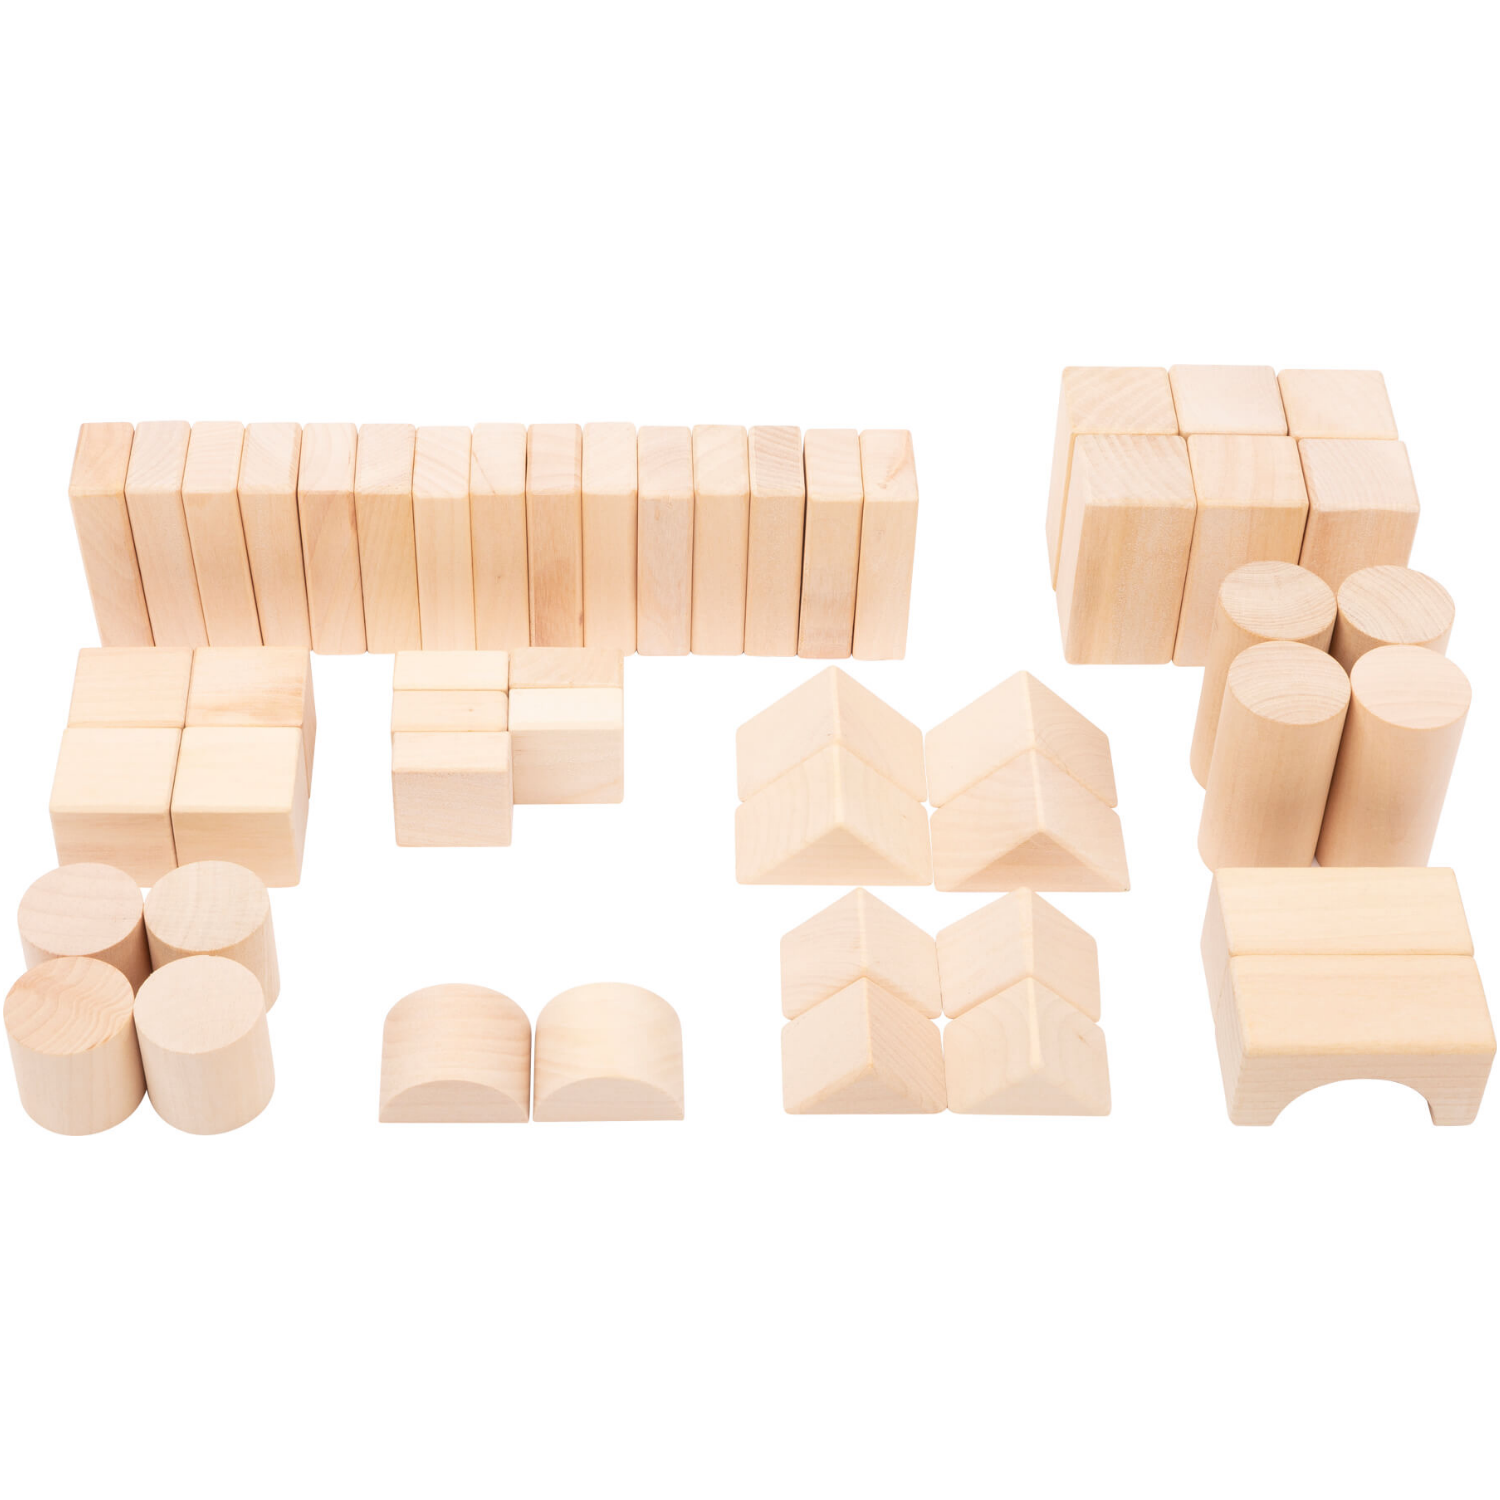 Natural Wooden Building Blocks In A Bag | 50 Blocks Overview | BeoVERDE.ie